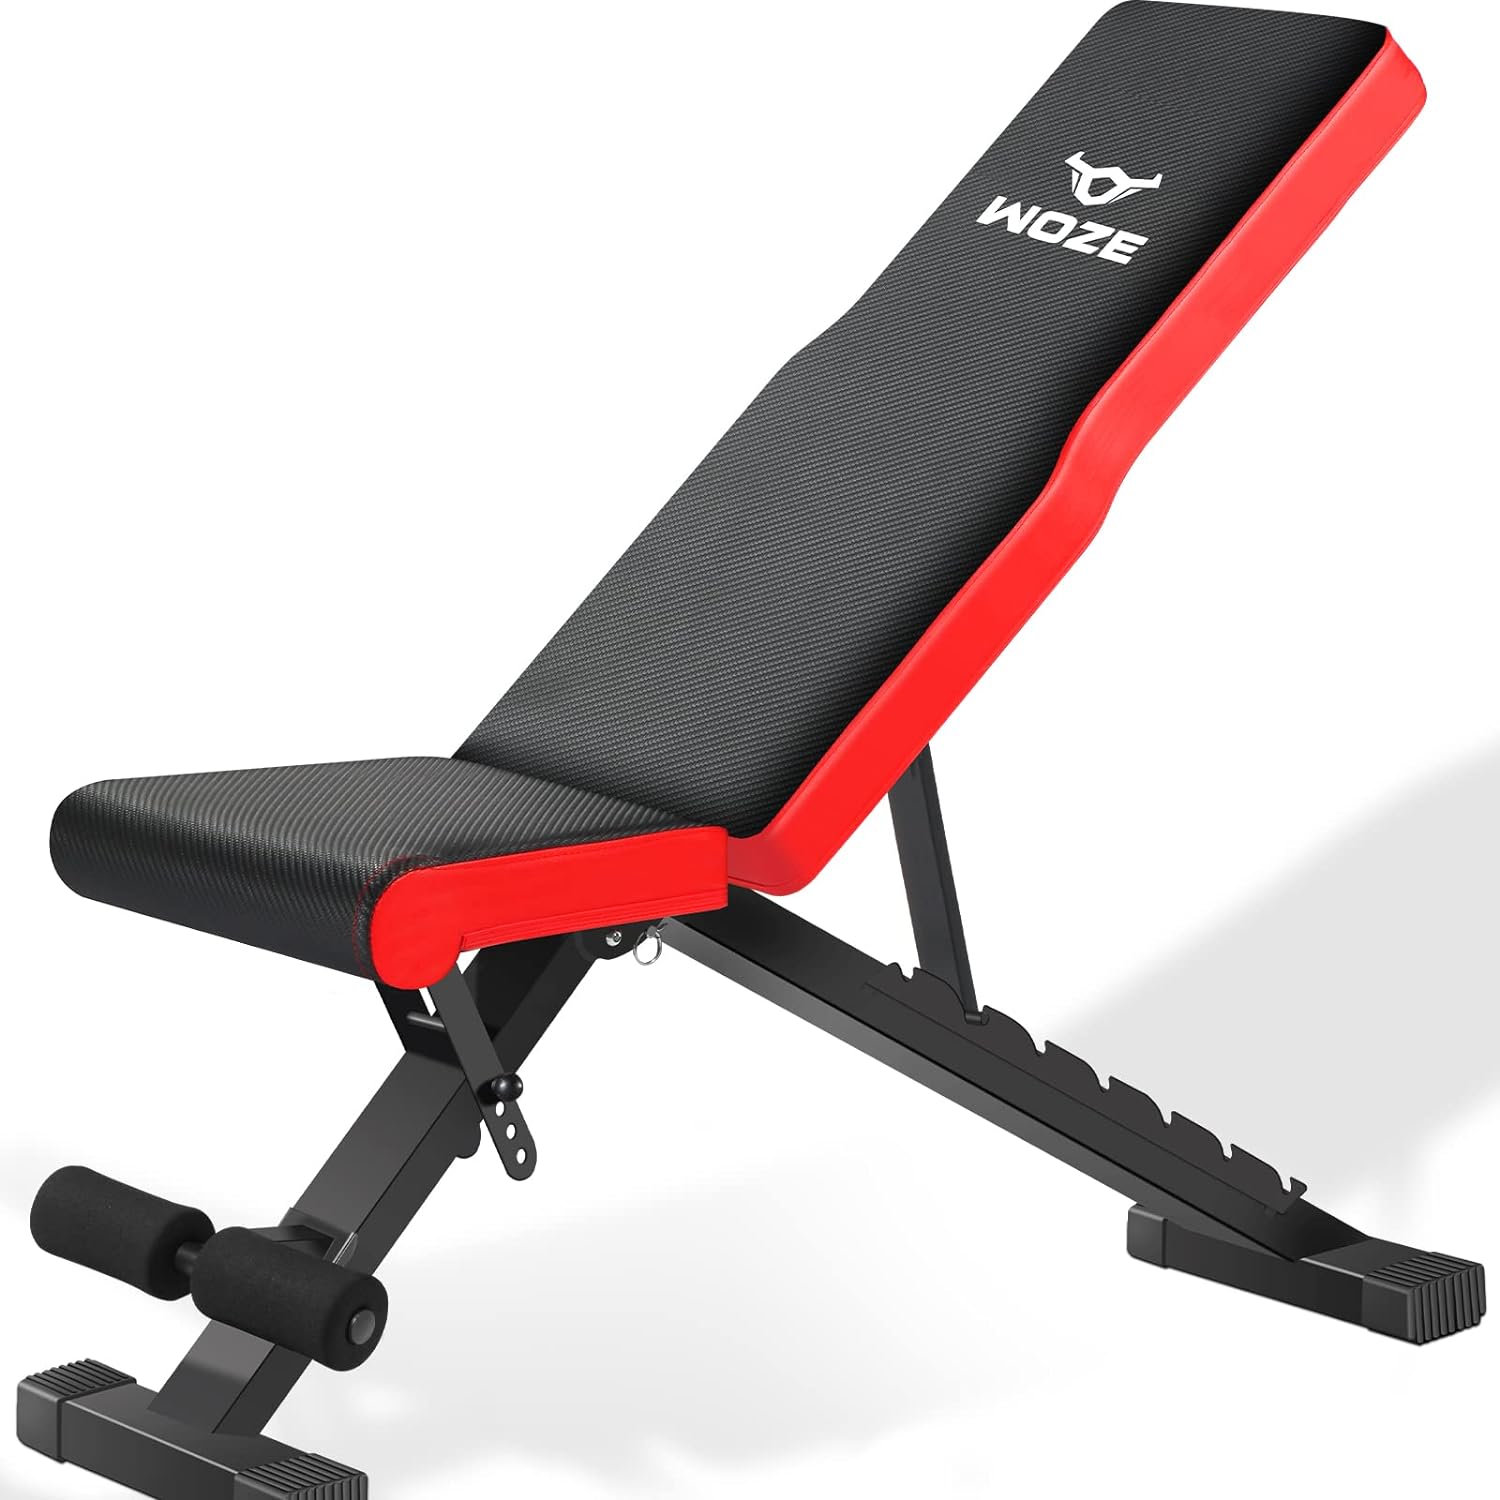  WOZE Adjustable Weight Bench, Foldable Workout Bench for Full Body Strength Training, Multi-Purpose Decline Incline Bench for Home Gym - New Version 